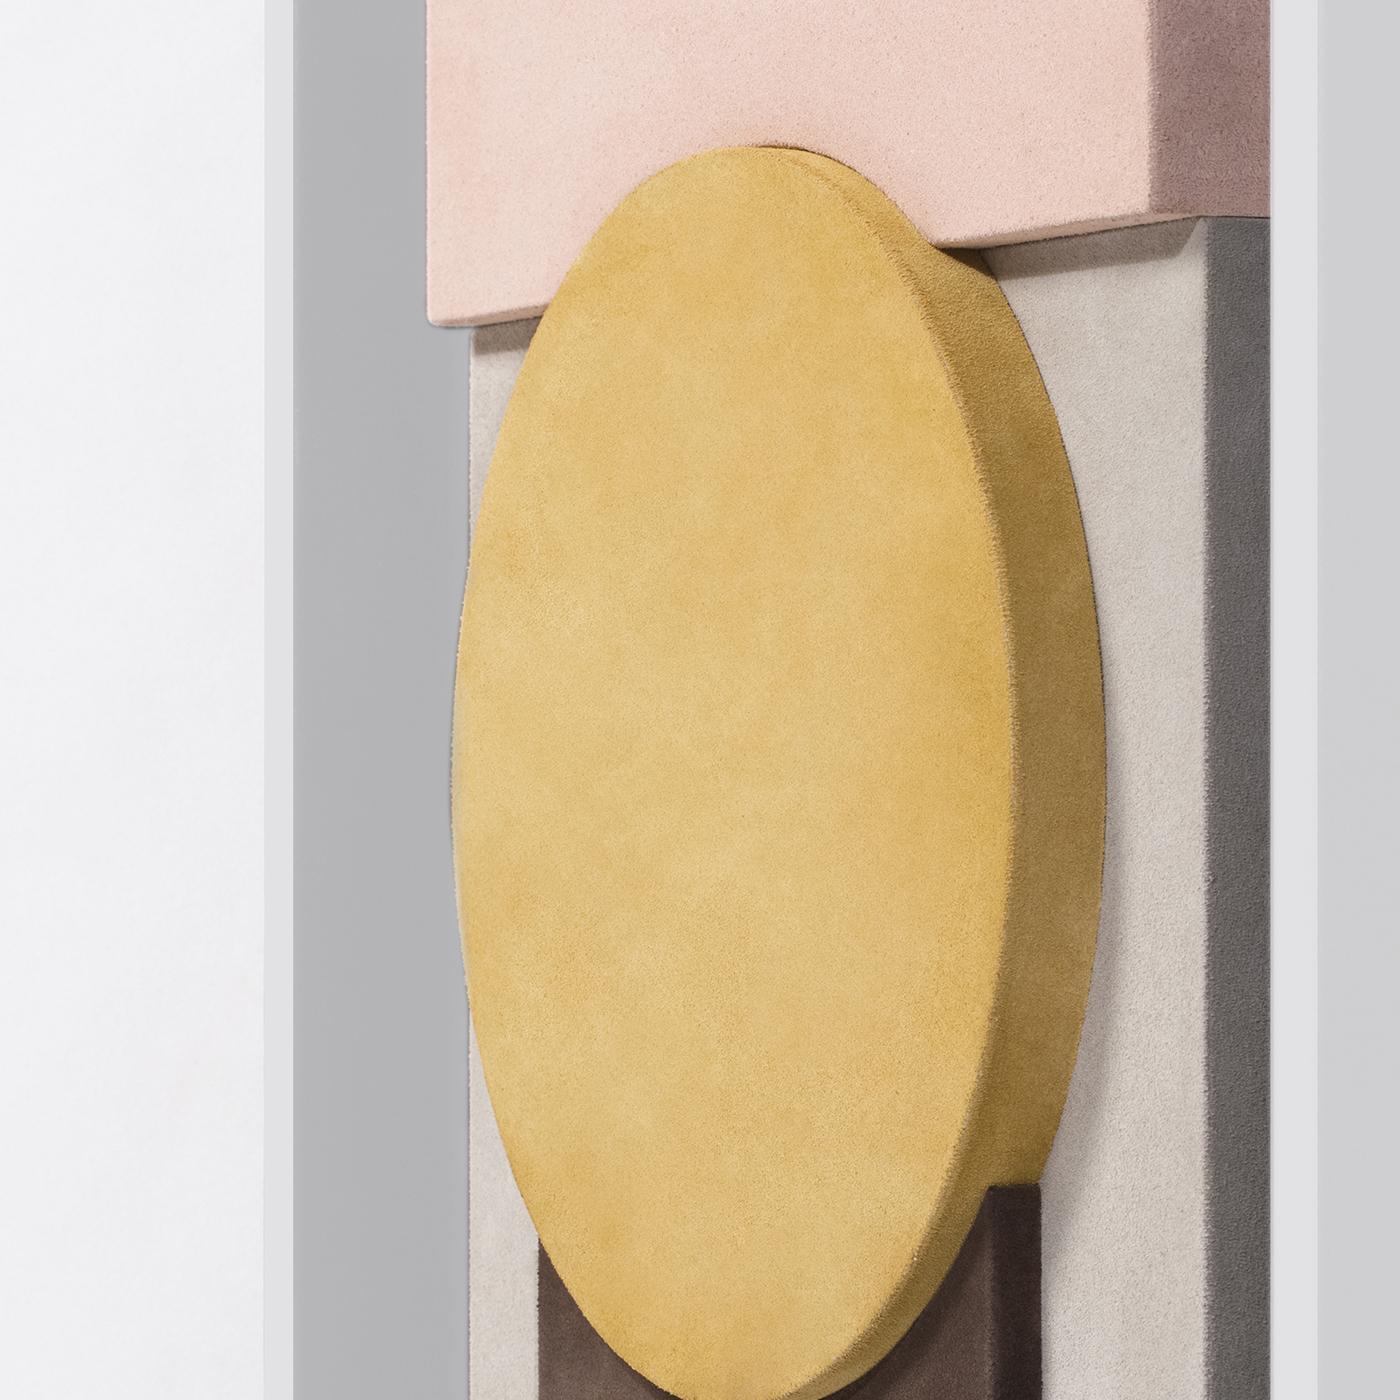 This abstractionist wall sculpture is distinguished for its deft use of geometries to create an architectural work of art for a contemporary or Minimalist decor. Geometric shapes are upholstered in a soft suede leather, with a central orange circle